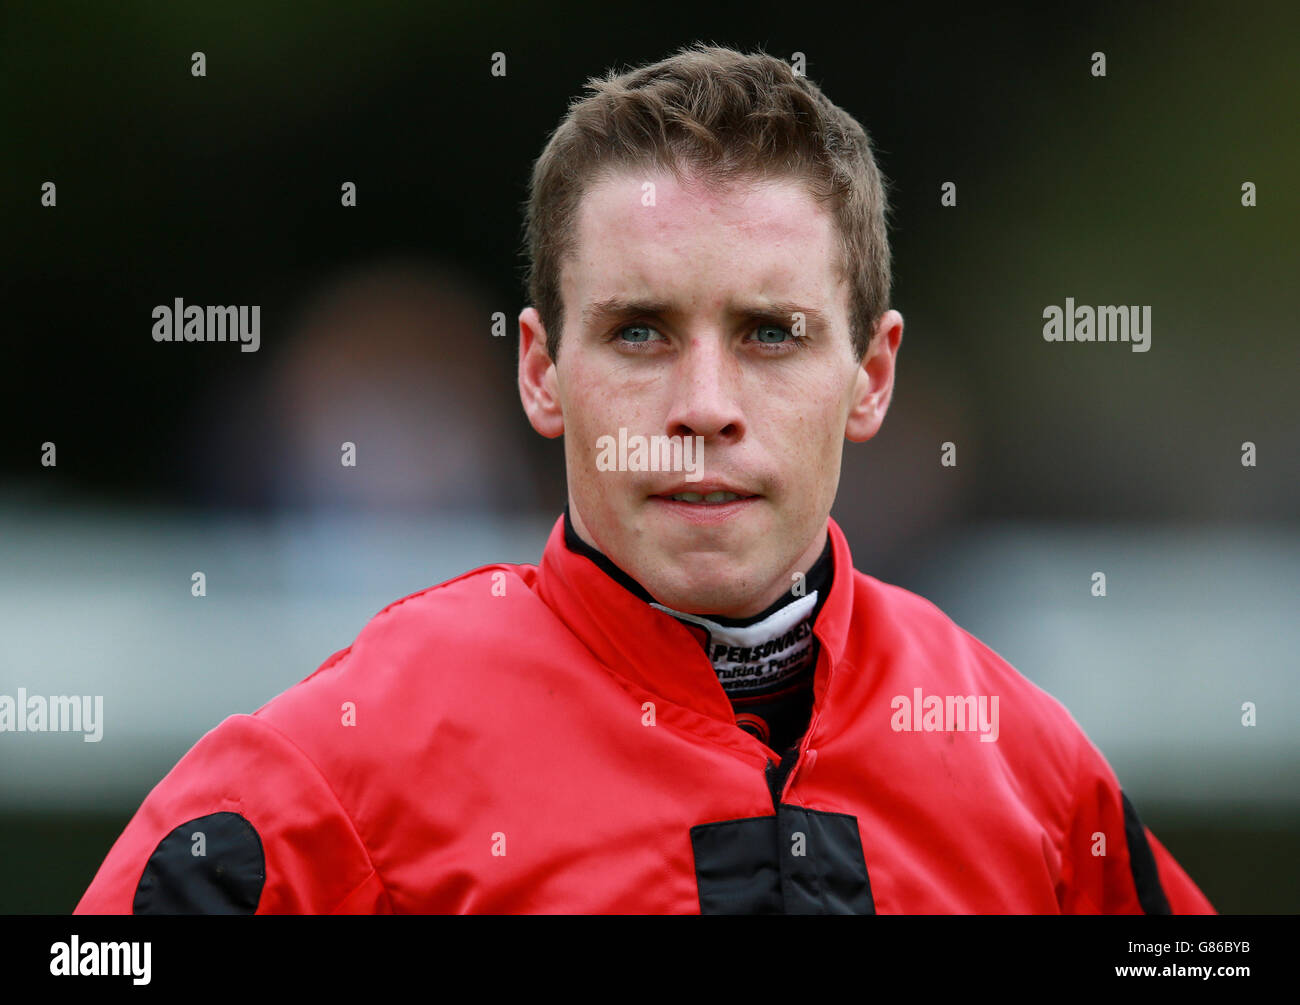 Jockey Lee Roche at Newbury Racecourse. PRESS ASSOCIATION Photo. Picture date: Friday August 14, 2015. See PA story RACING Newbury. Photo credit should read: David Davies/PA Wire Stock Photo